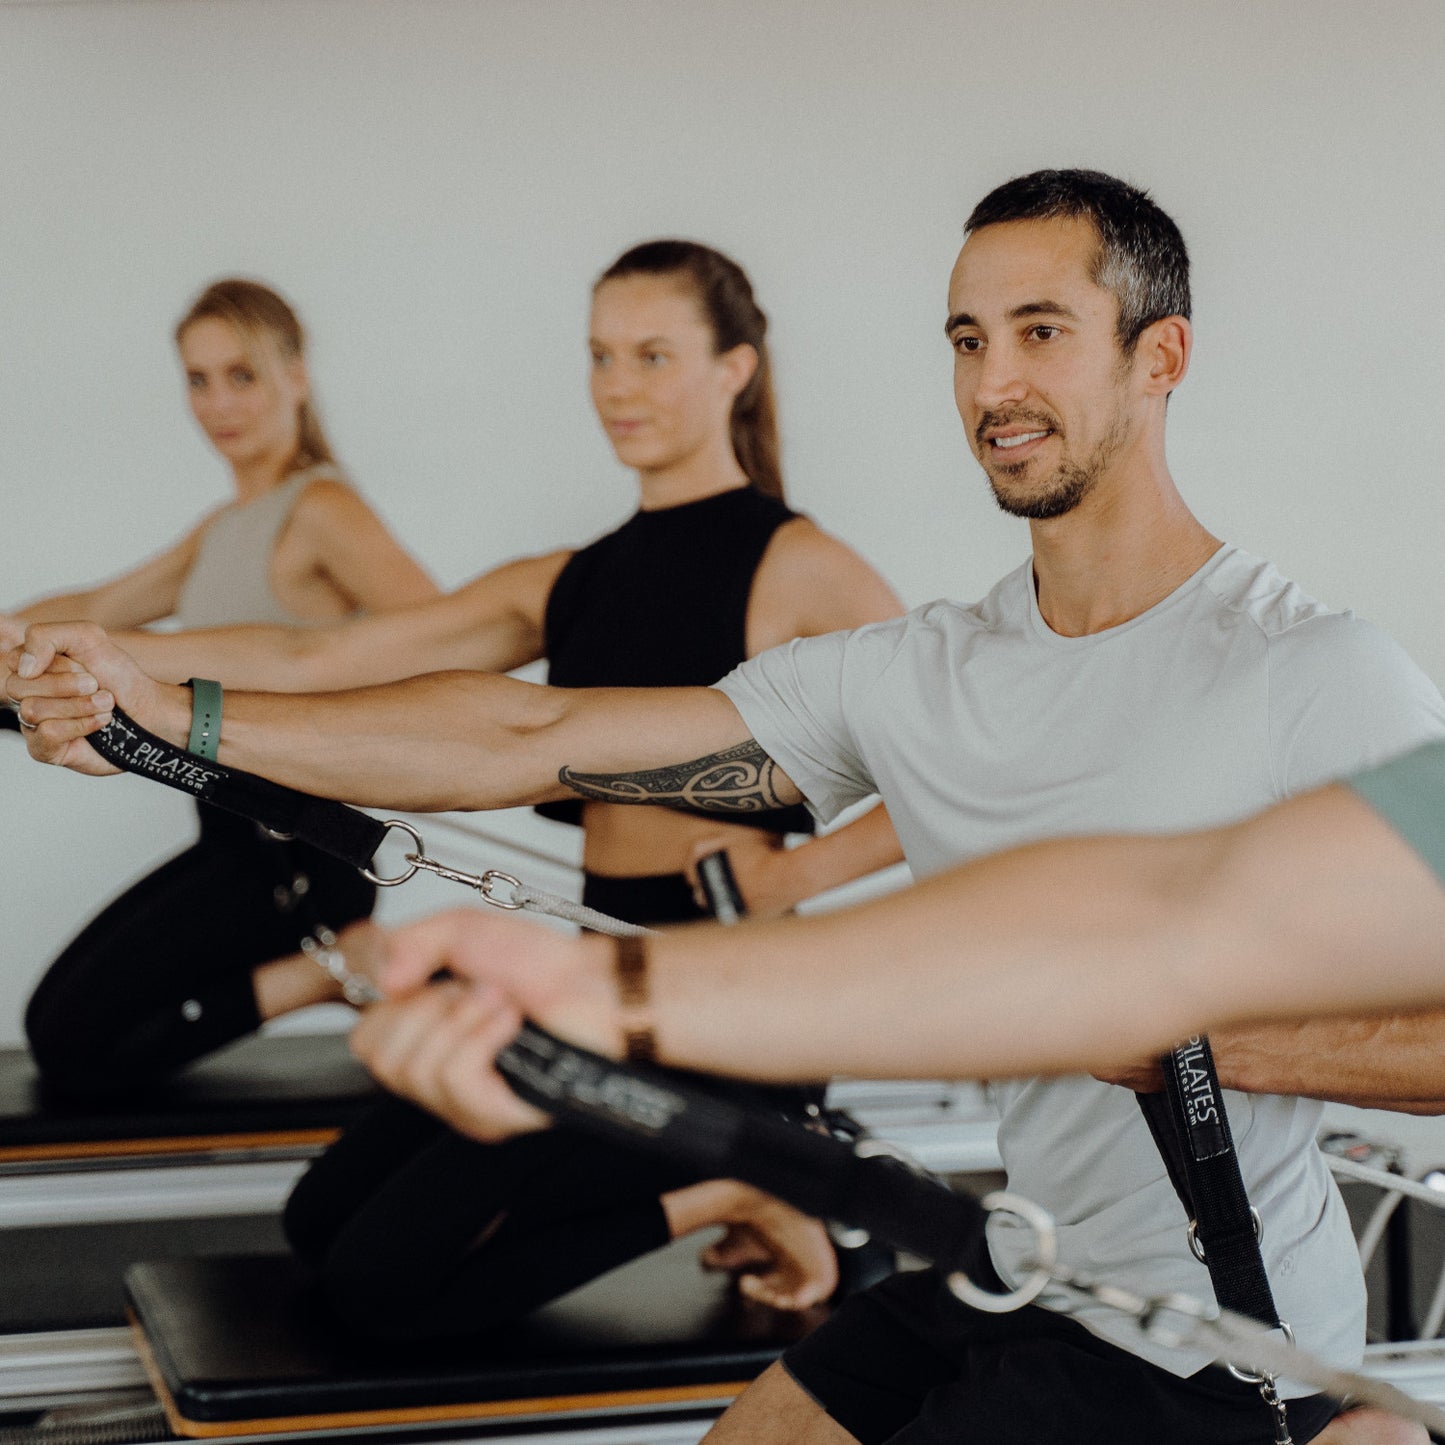 Reformer Pilates Classes. Workout at Suna Pilates in Takapuna Auckland